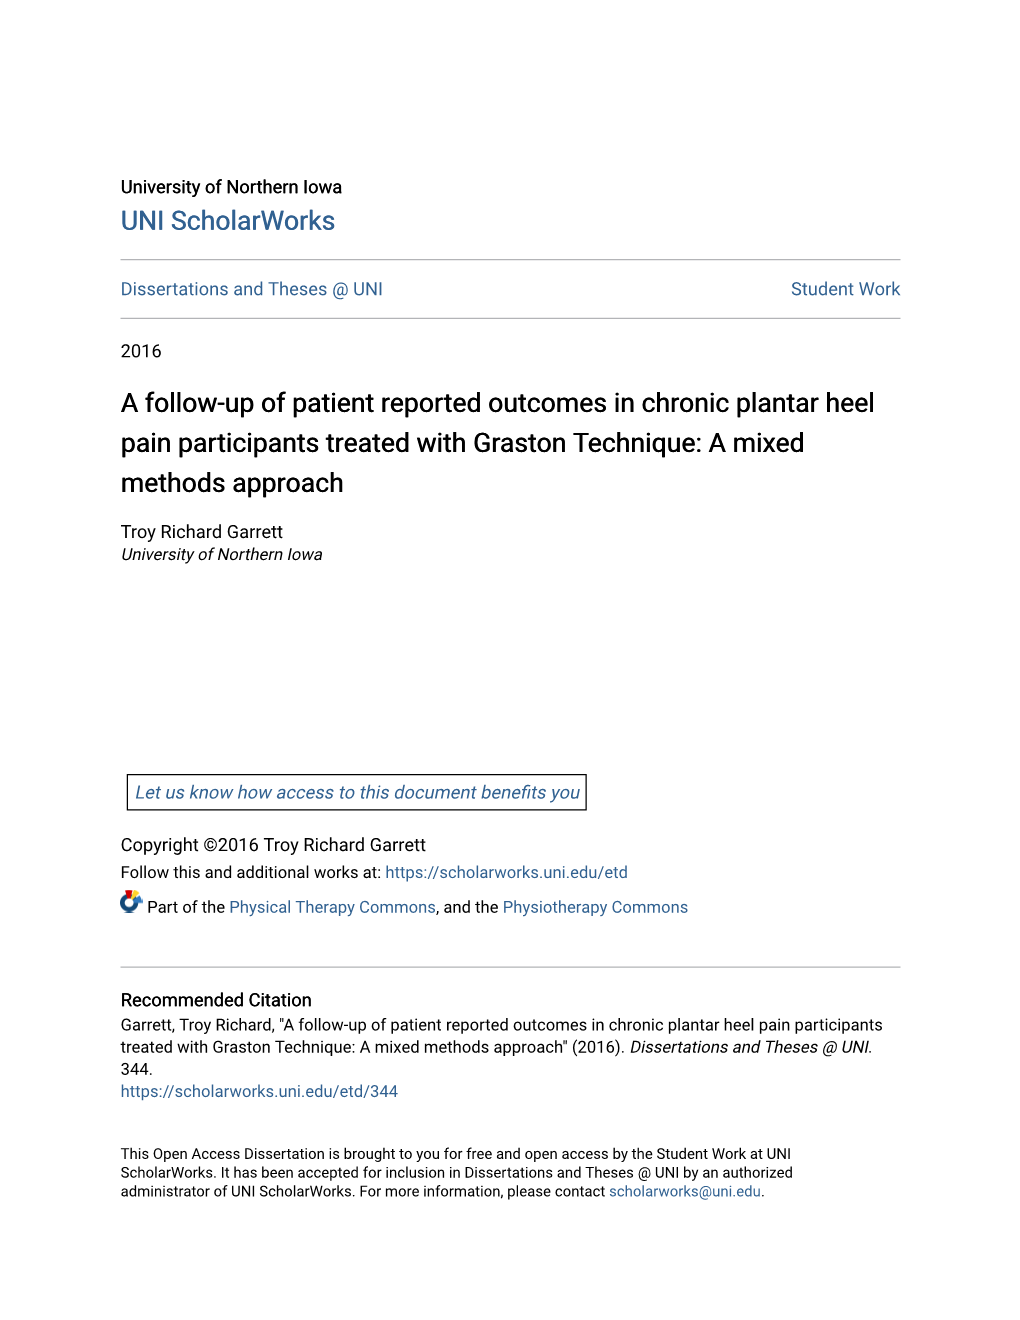 A Follow-Up of Patient Reported Outcomes in Chronic Plantar Heel Pain Participants Treated with Graston Technique: a Mixed Methods Approach